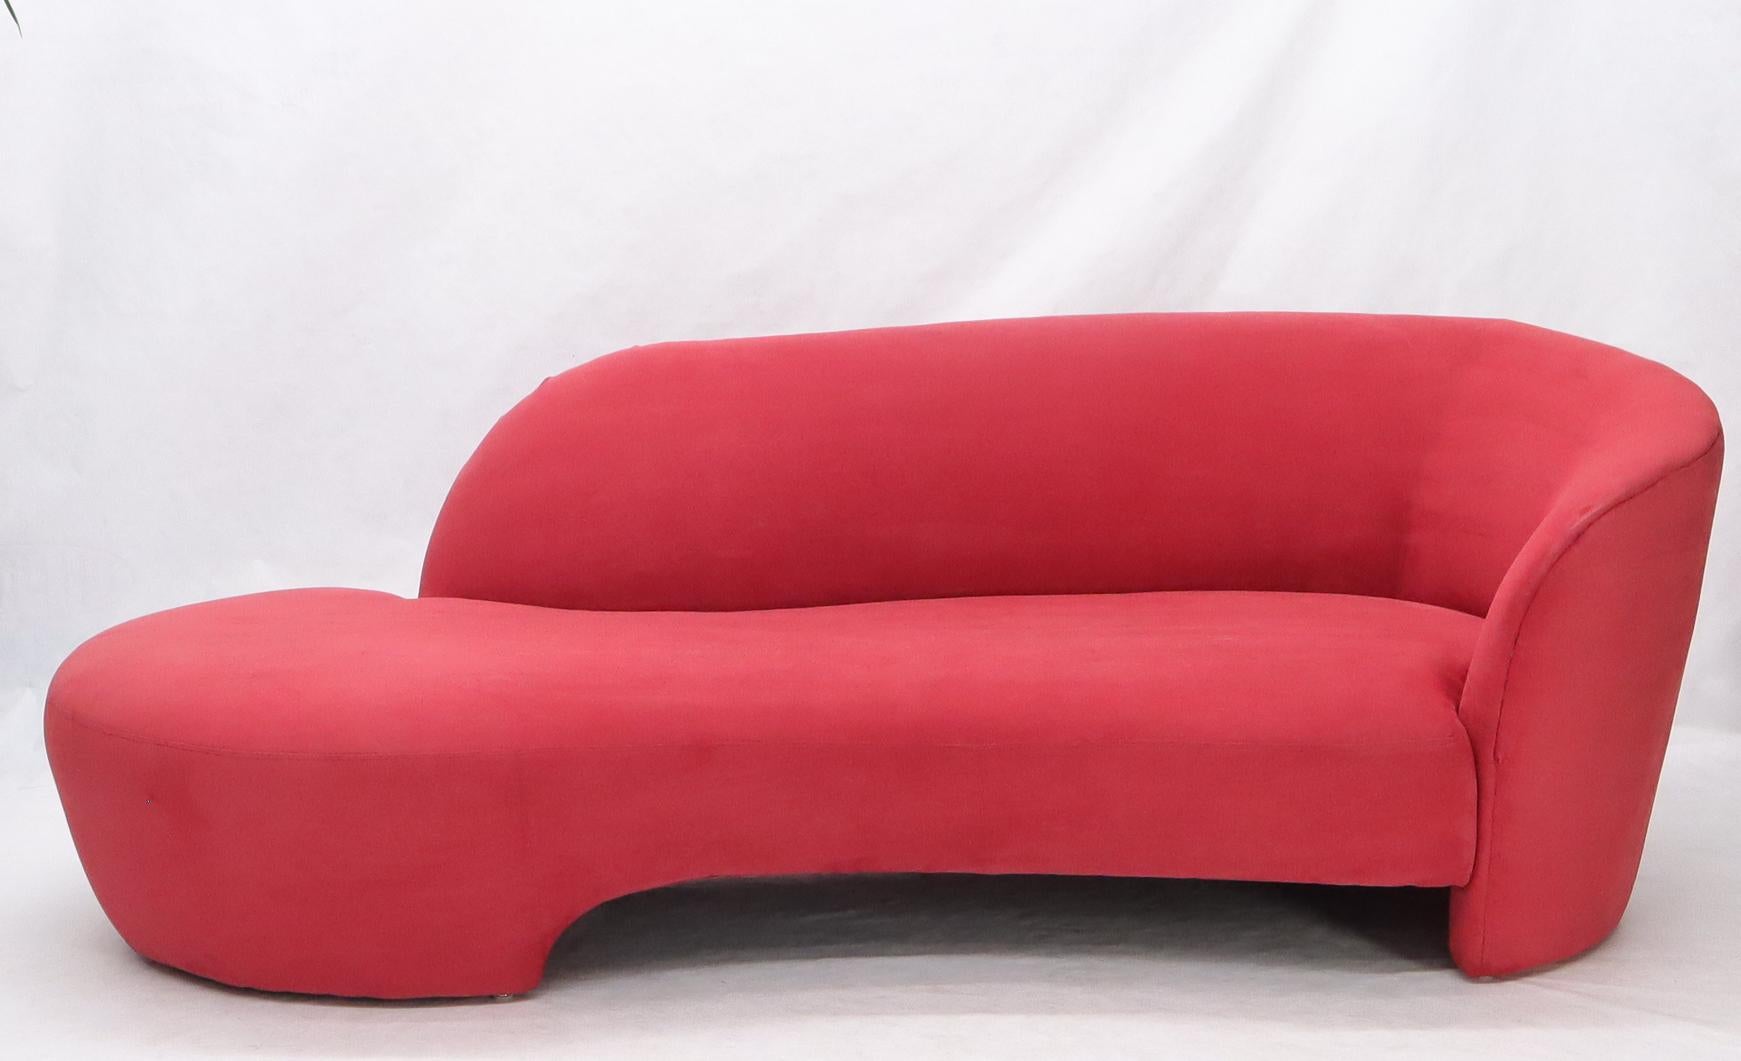 Ultrasuede Red Suede Weiman Preview Chaise Lounge Cloud Sofa For Sale